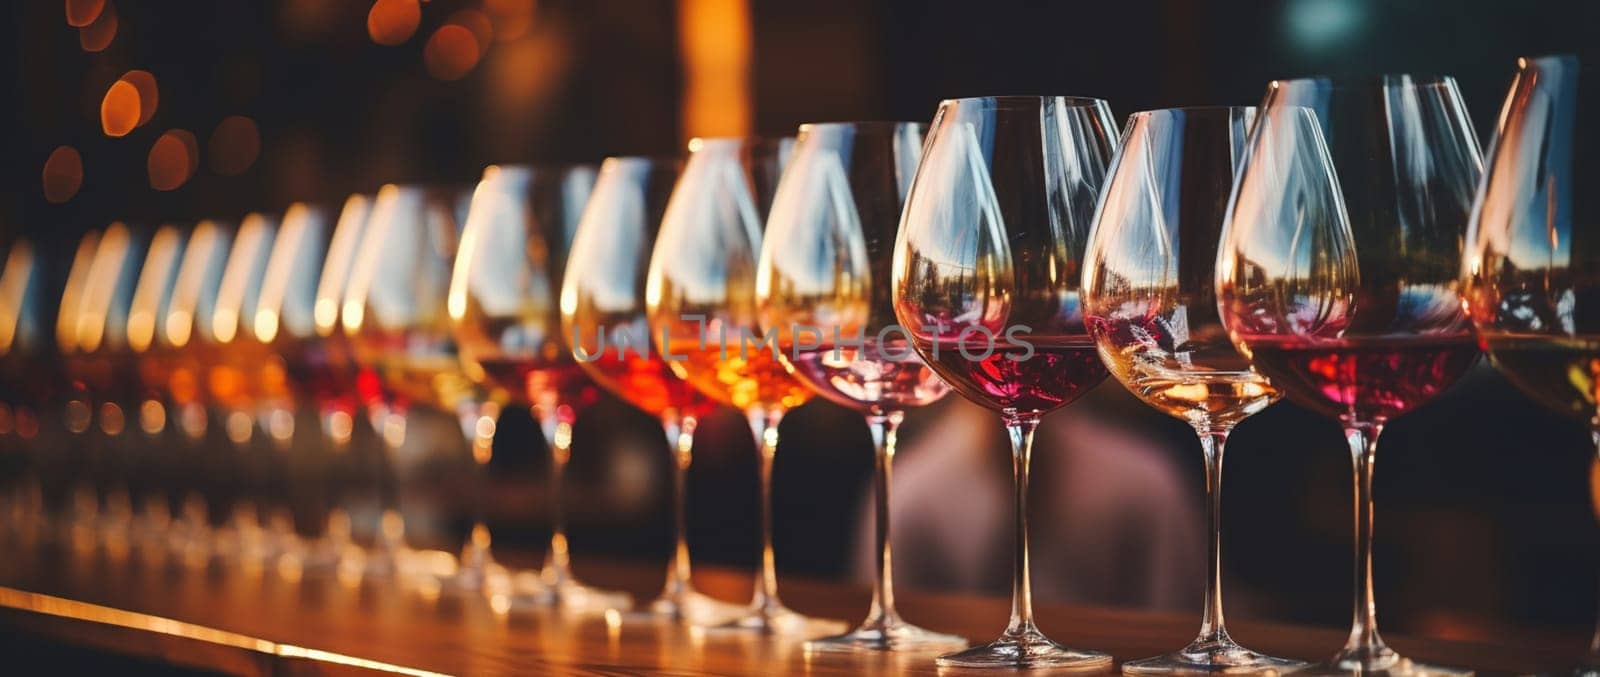 Wine glasses in a row. Pouring wine. Buffet table celebration of wine tasting. Nightlife, celebration and entertainment concept. Horizontal, wide screen banner format. High quality photo